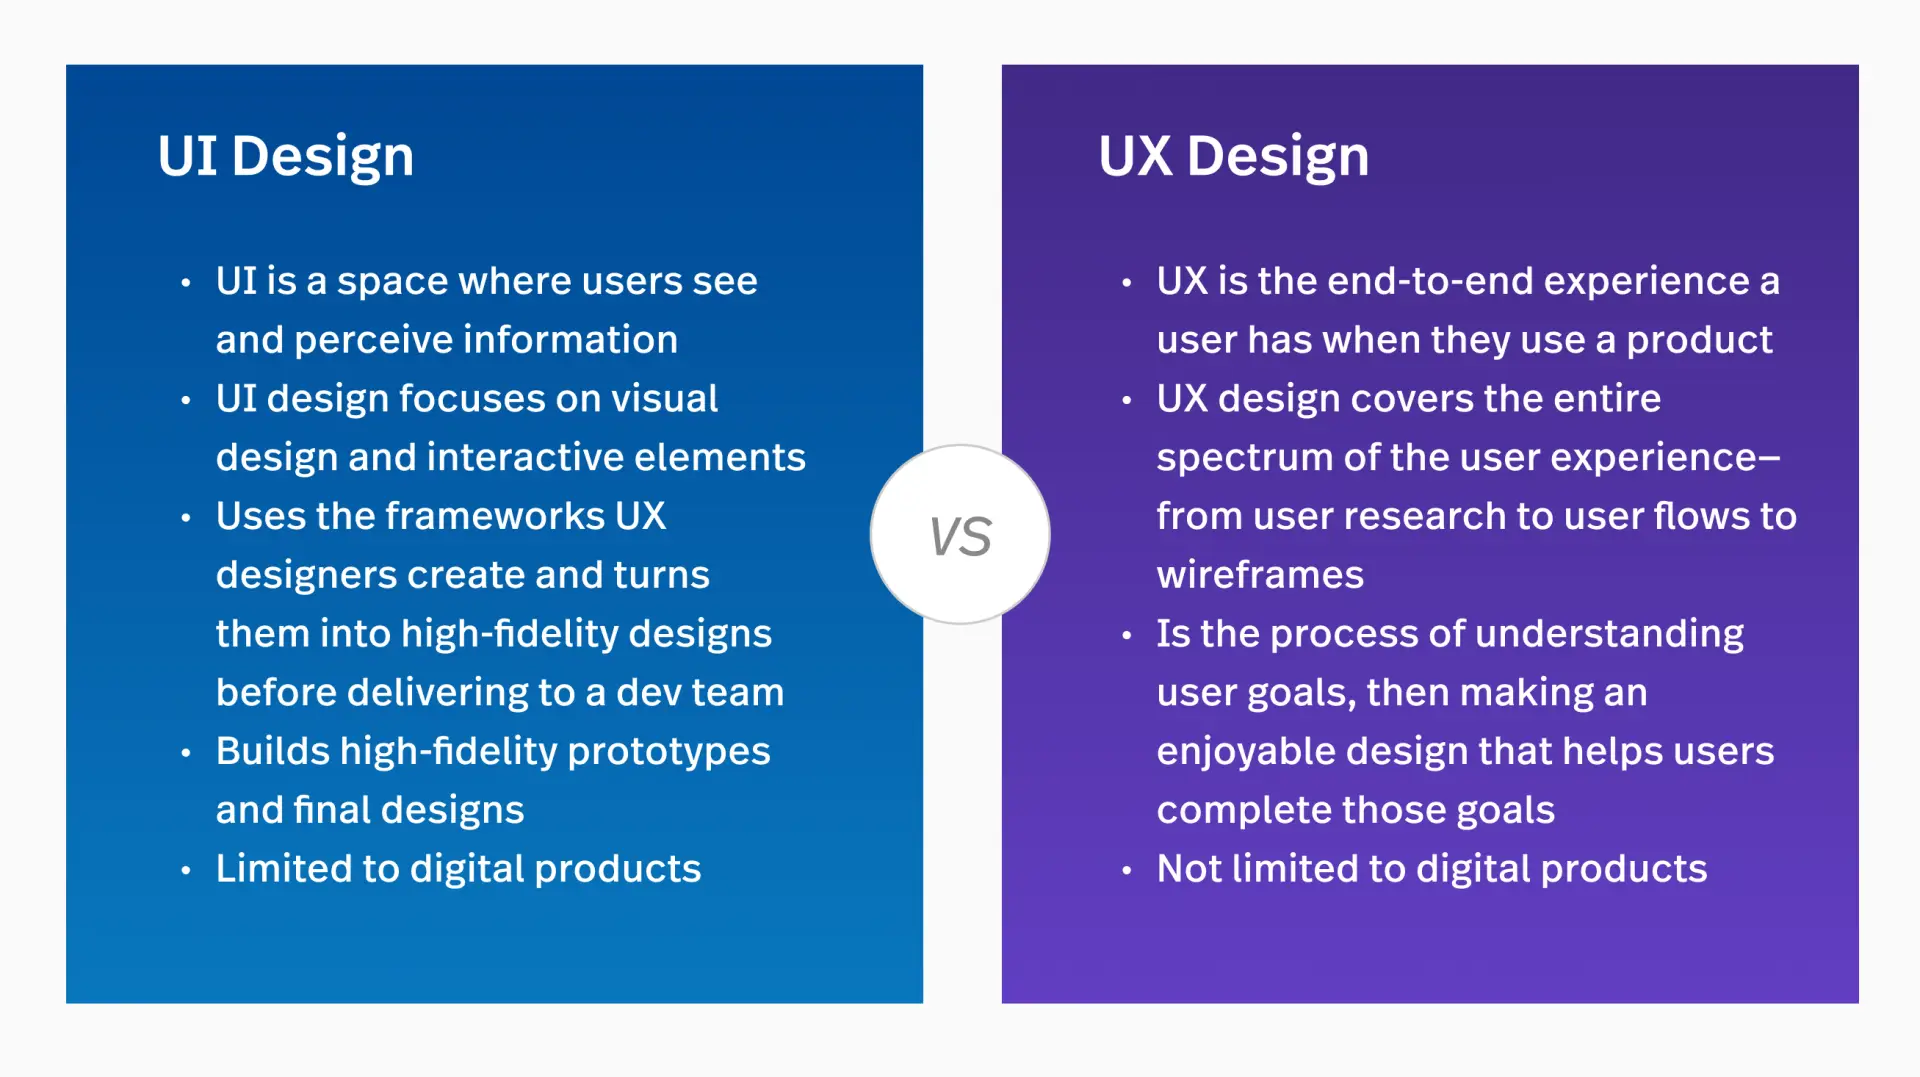 UI and UX design might seem similar, but there are quite a few differences between these areas